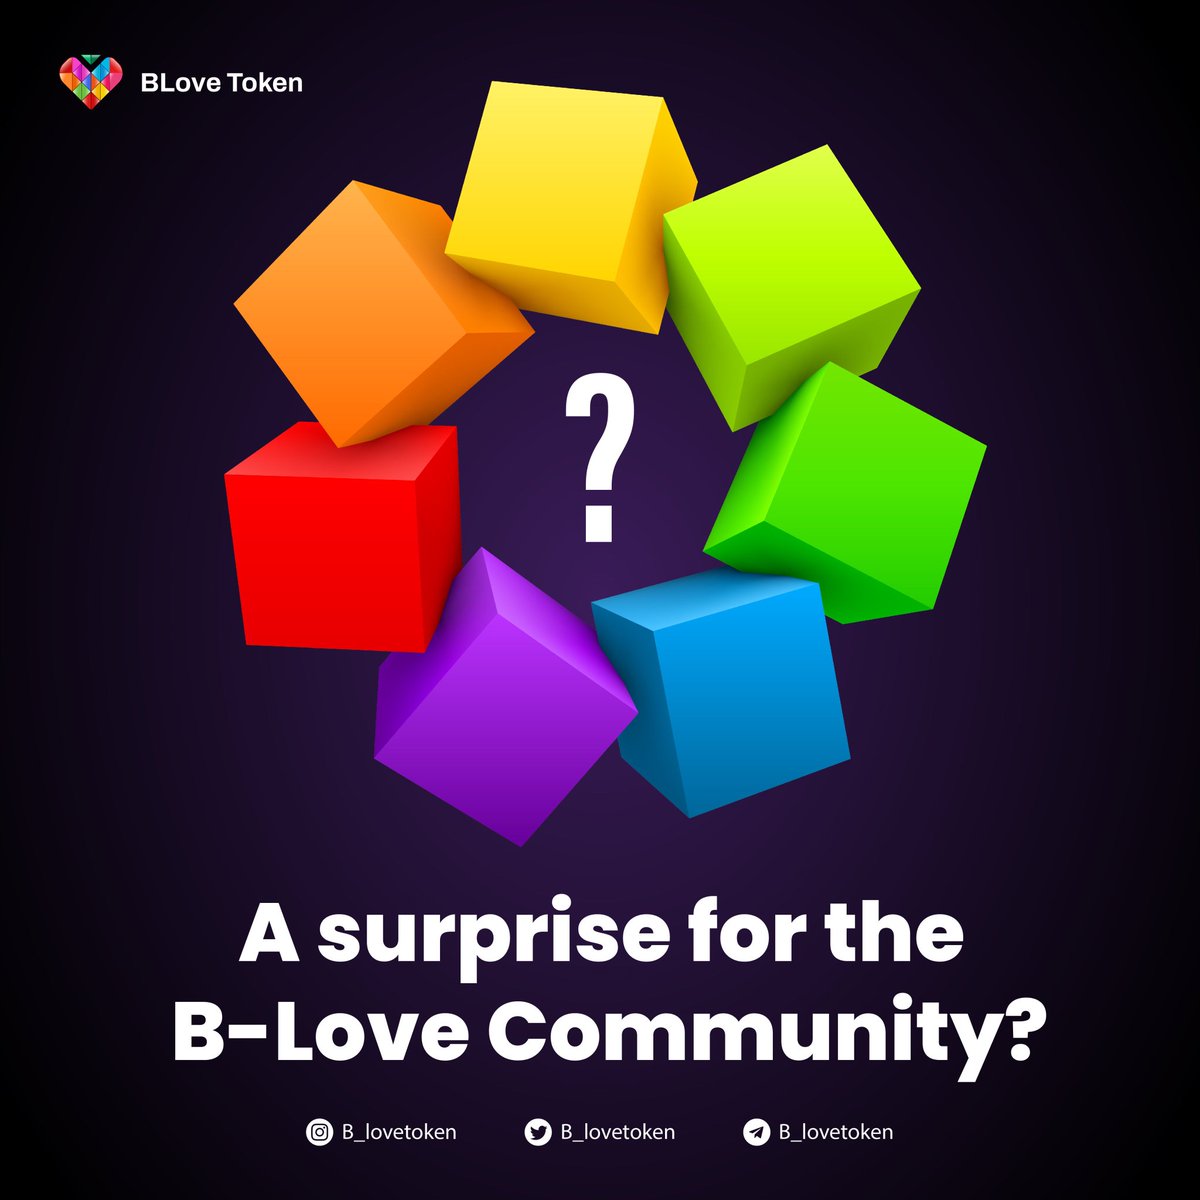 A surprise for the B-Love Community is coming!!🚀 Remember, good things take time, but great things require a little extra patience and dedication. Let's keep spreading positivity because it's the magnet for success. Together, we'll achieve amazing milestones! 🤝